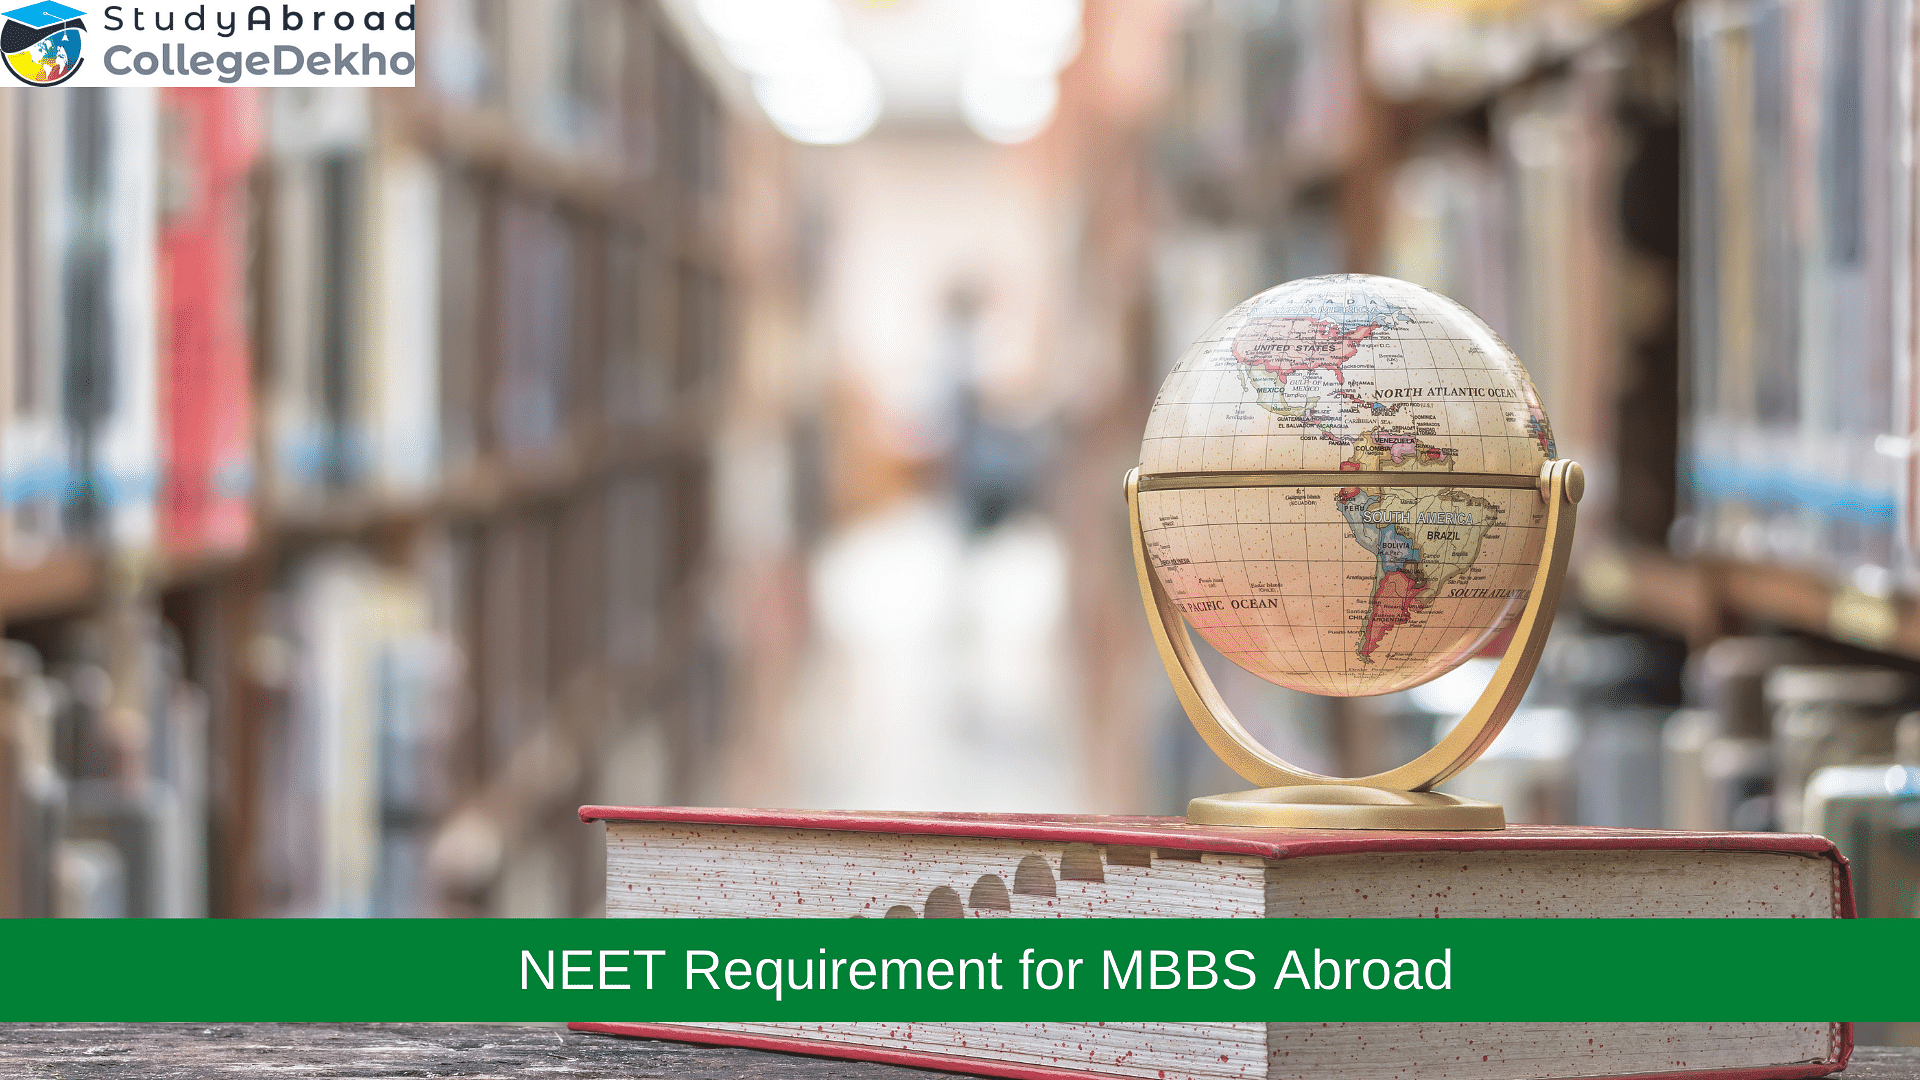 Is NEET Compulsory for MBBS Abroad?